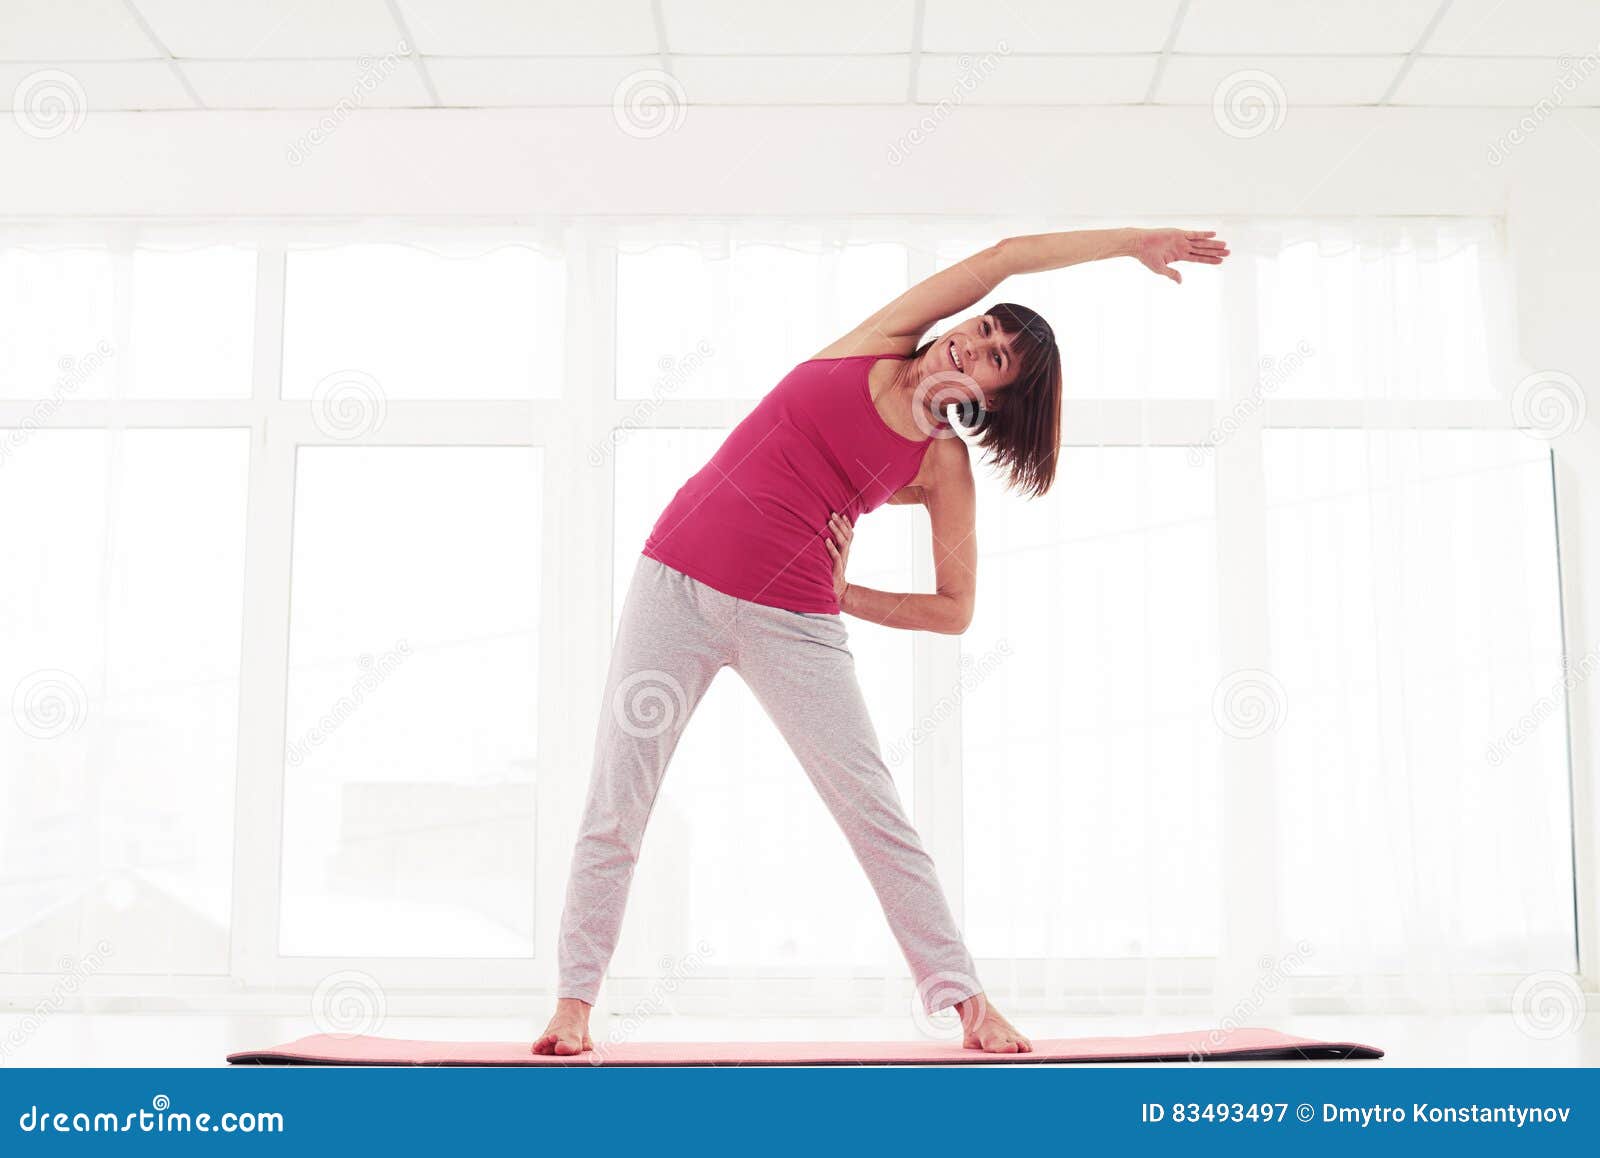 Excited Model Standing Side Stretch in the Gym Stock Image - Image of club,  physical: 83493497